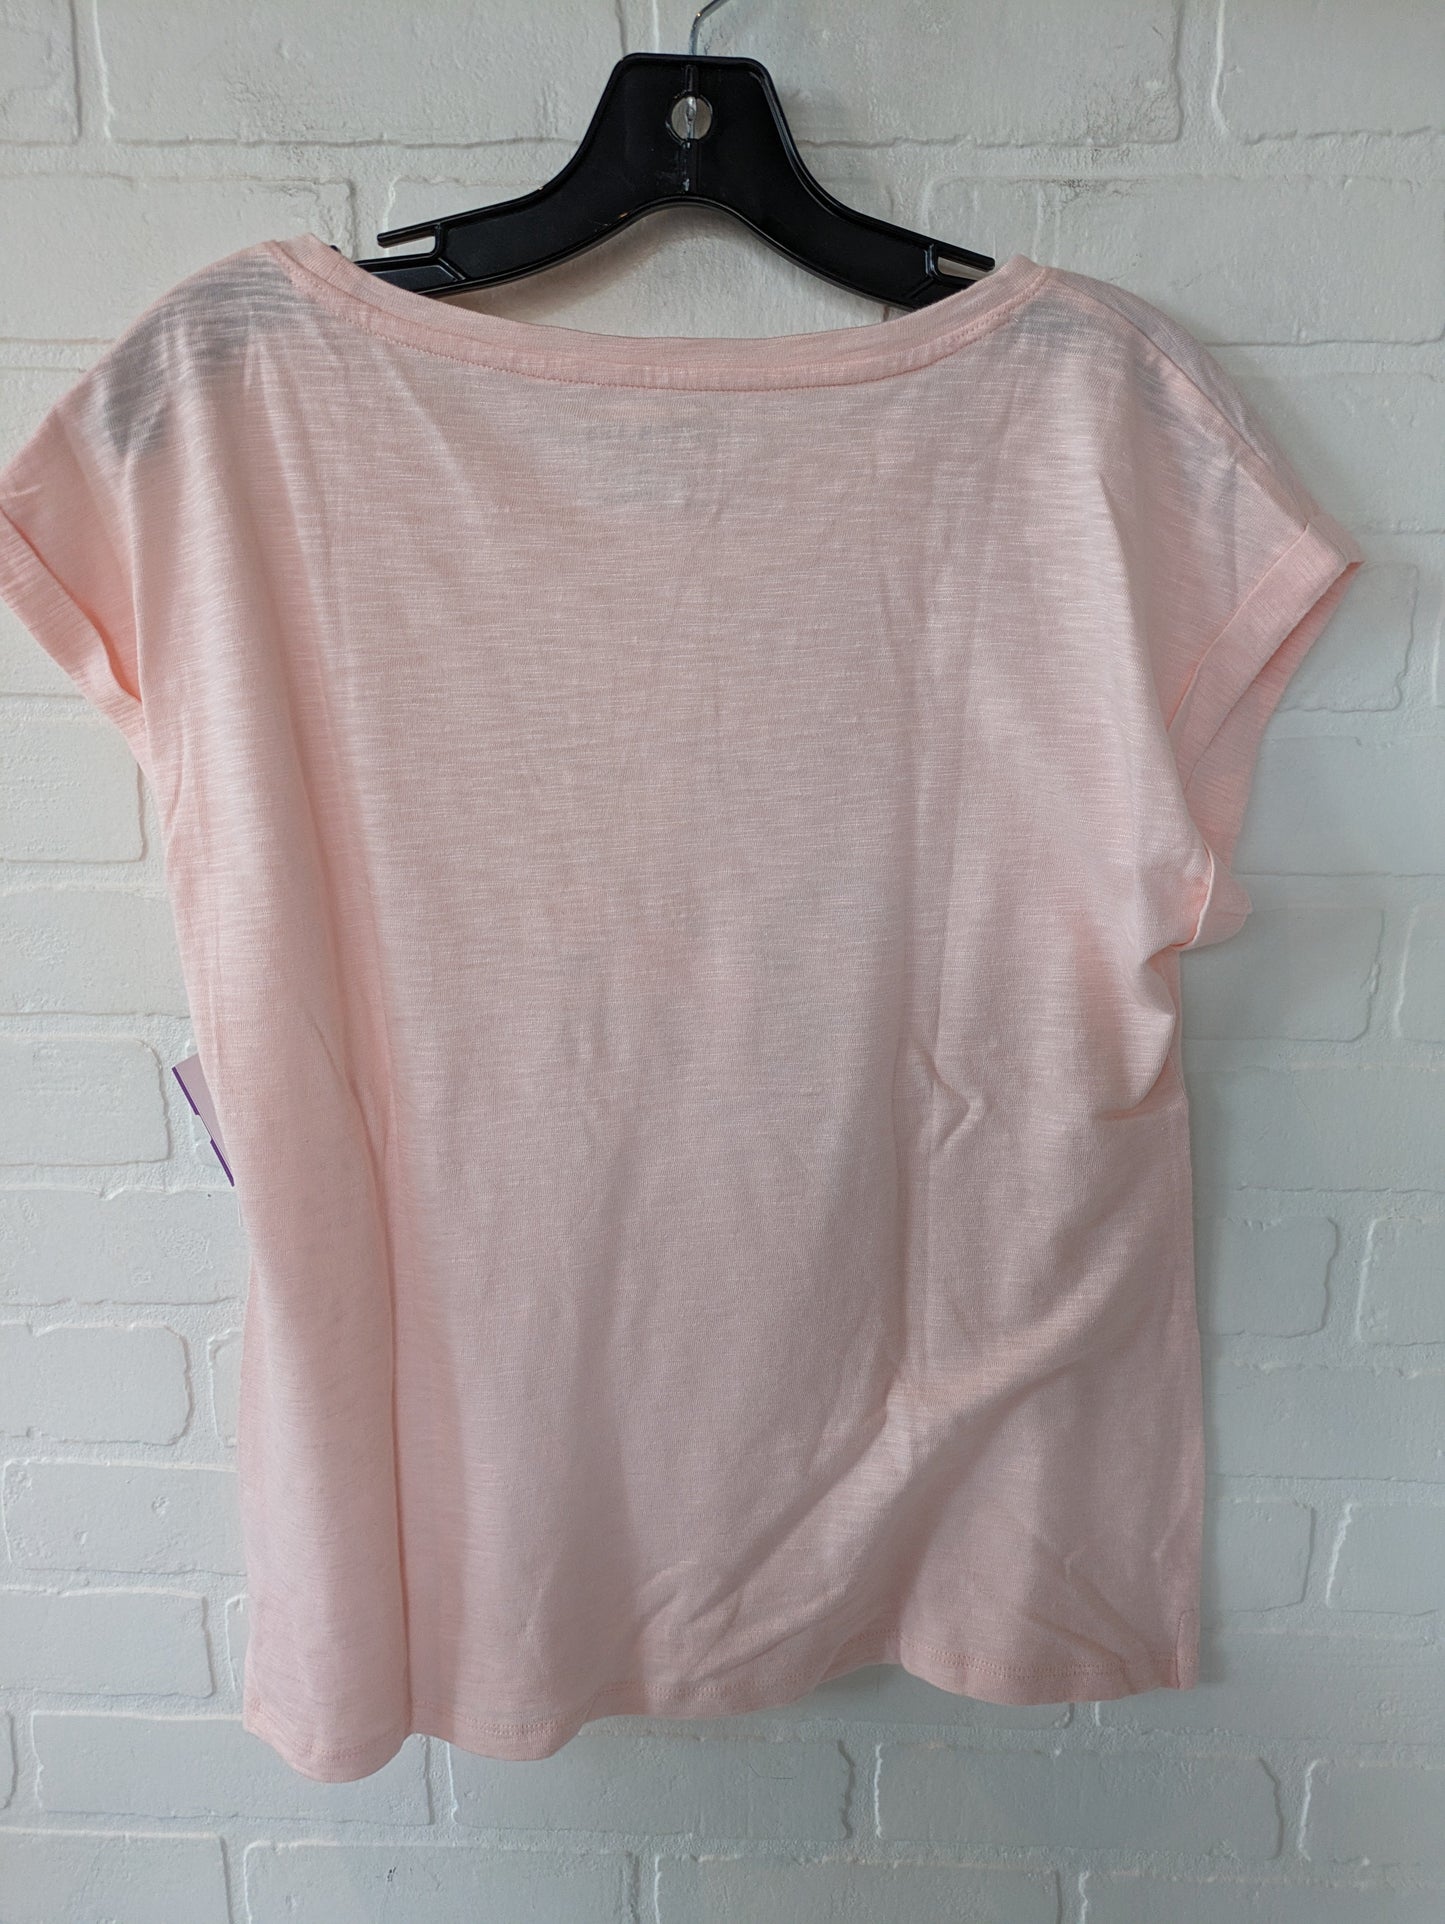 Pink Top Short Sleeve Talbots, Size M